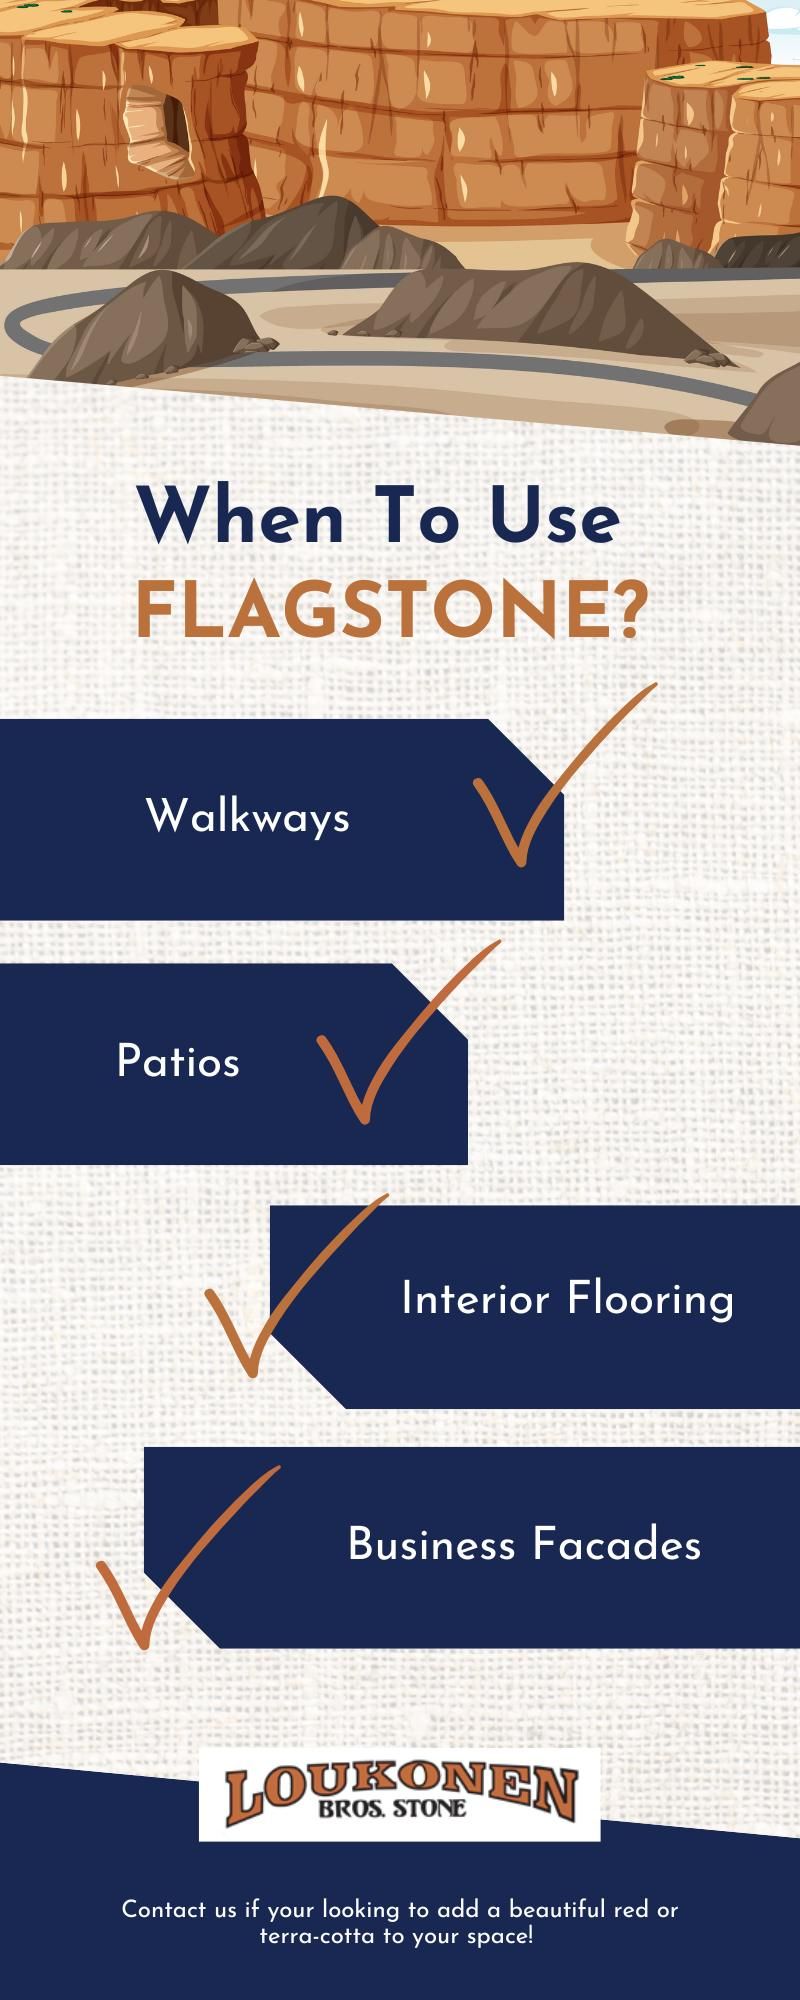 When To Use Flagstone Infographic.jpg